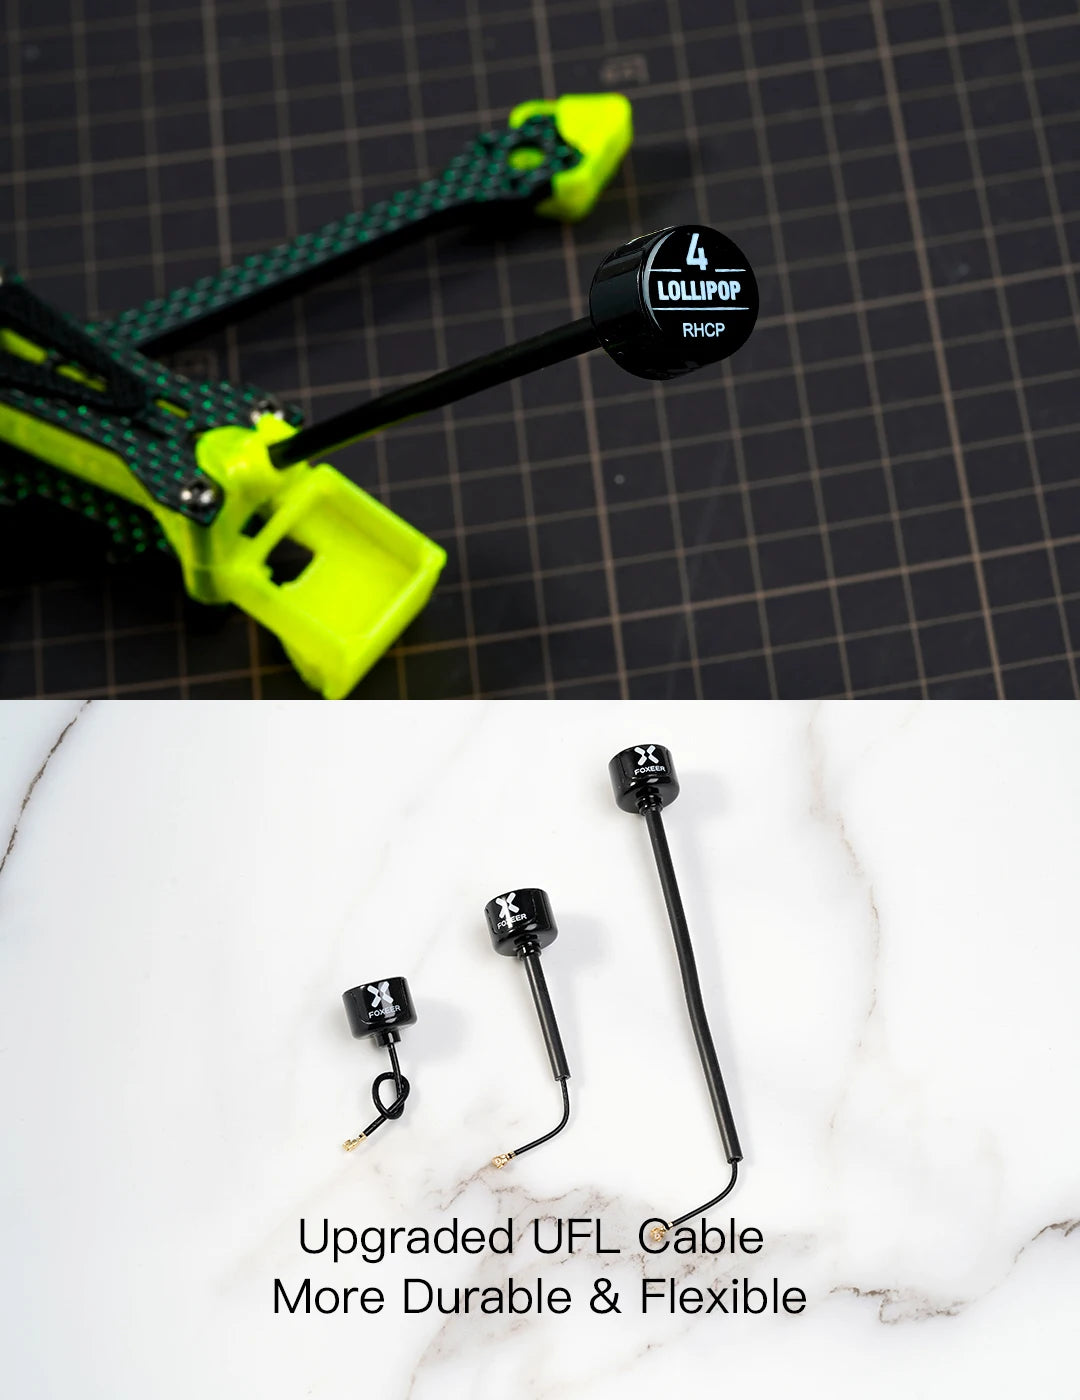 Foxeer Antenna, LOLLIPOP RHCP CotLe Upgraded UFL Cable More Durable 